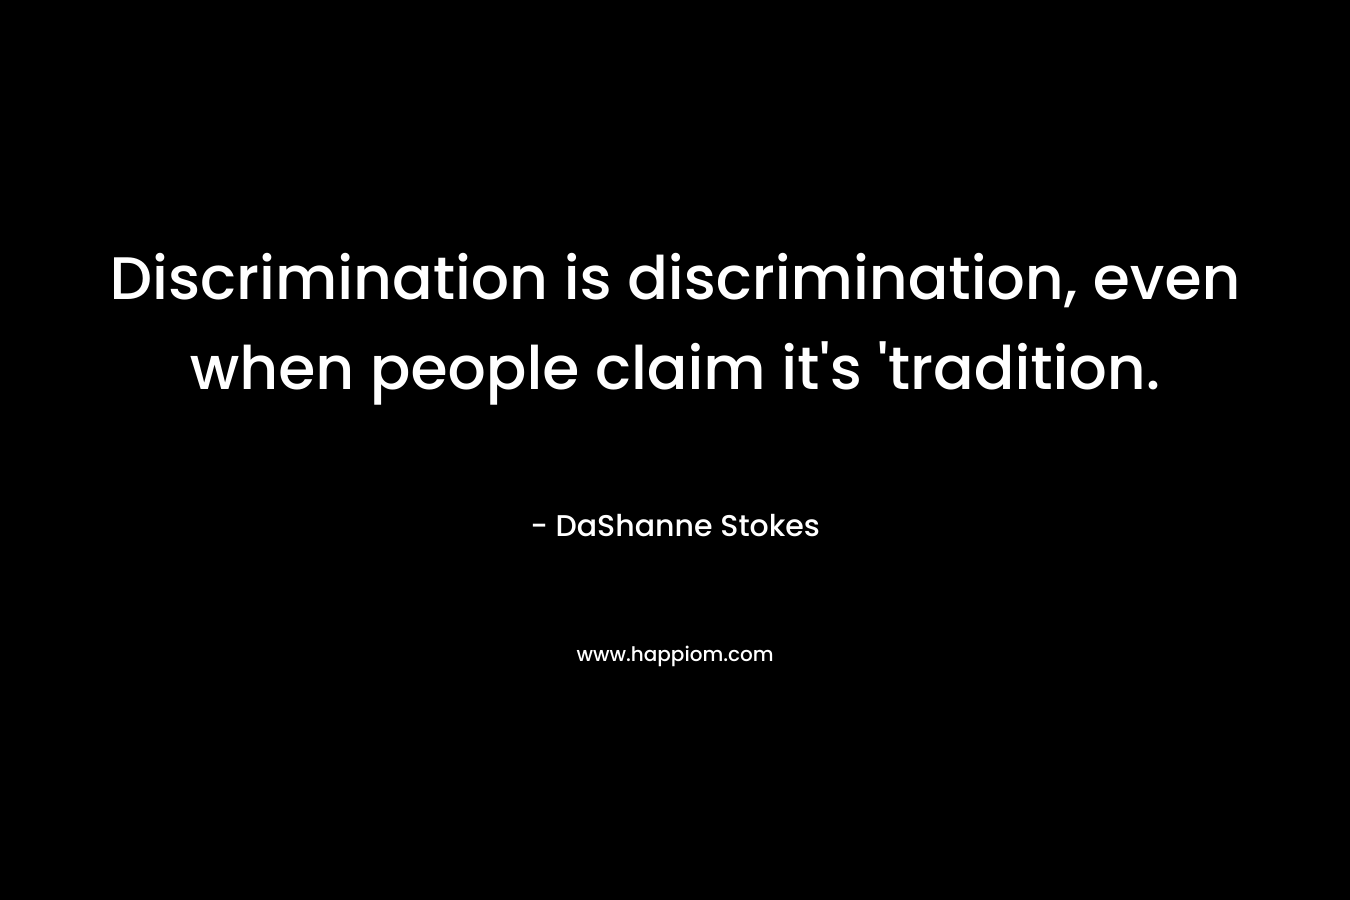 Discrimination is discrimination, even when people claim it's 'tradition.